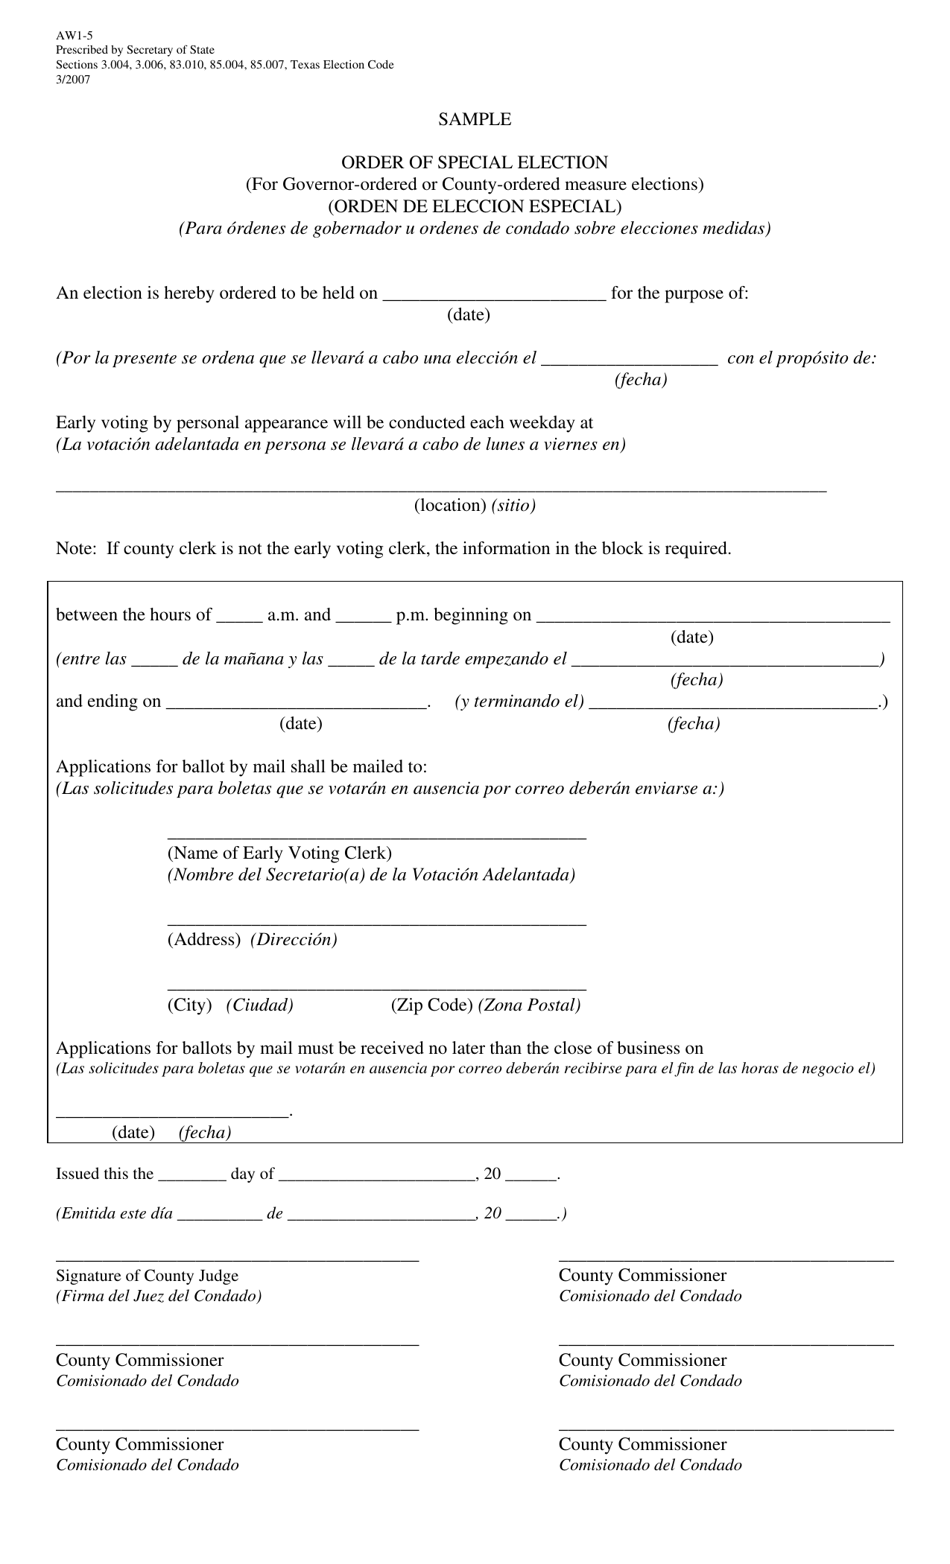 Form AW1-5 Order of Special Election (For Governor-Ordered or County-Ordered Measure Elections) - Texas (English / Spanish), Page 1